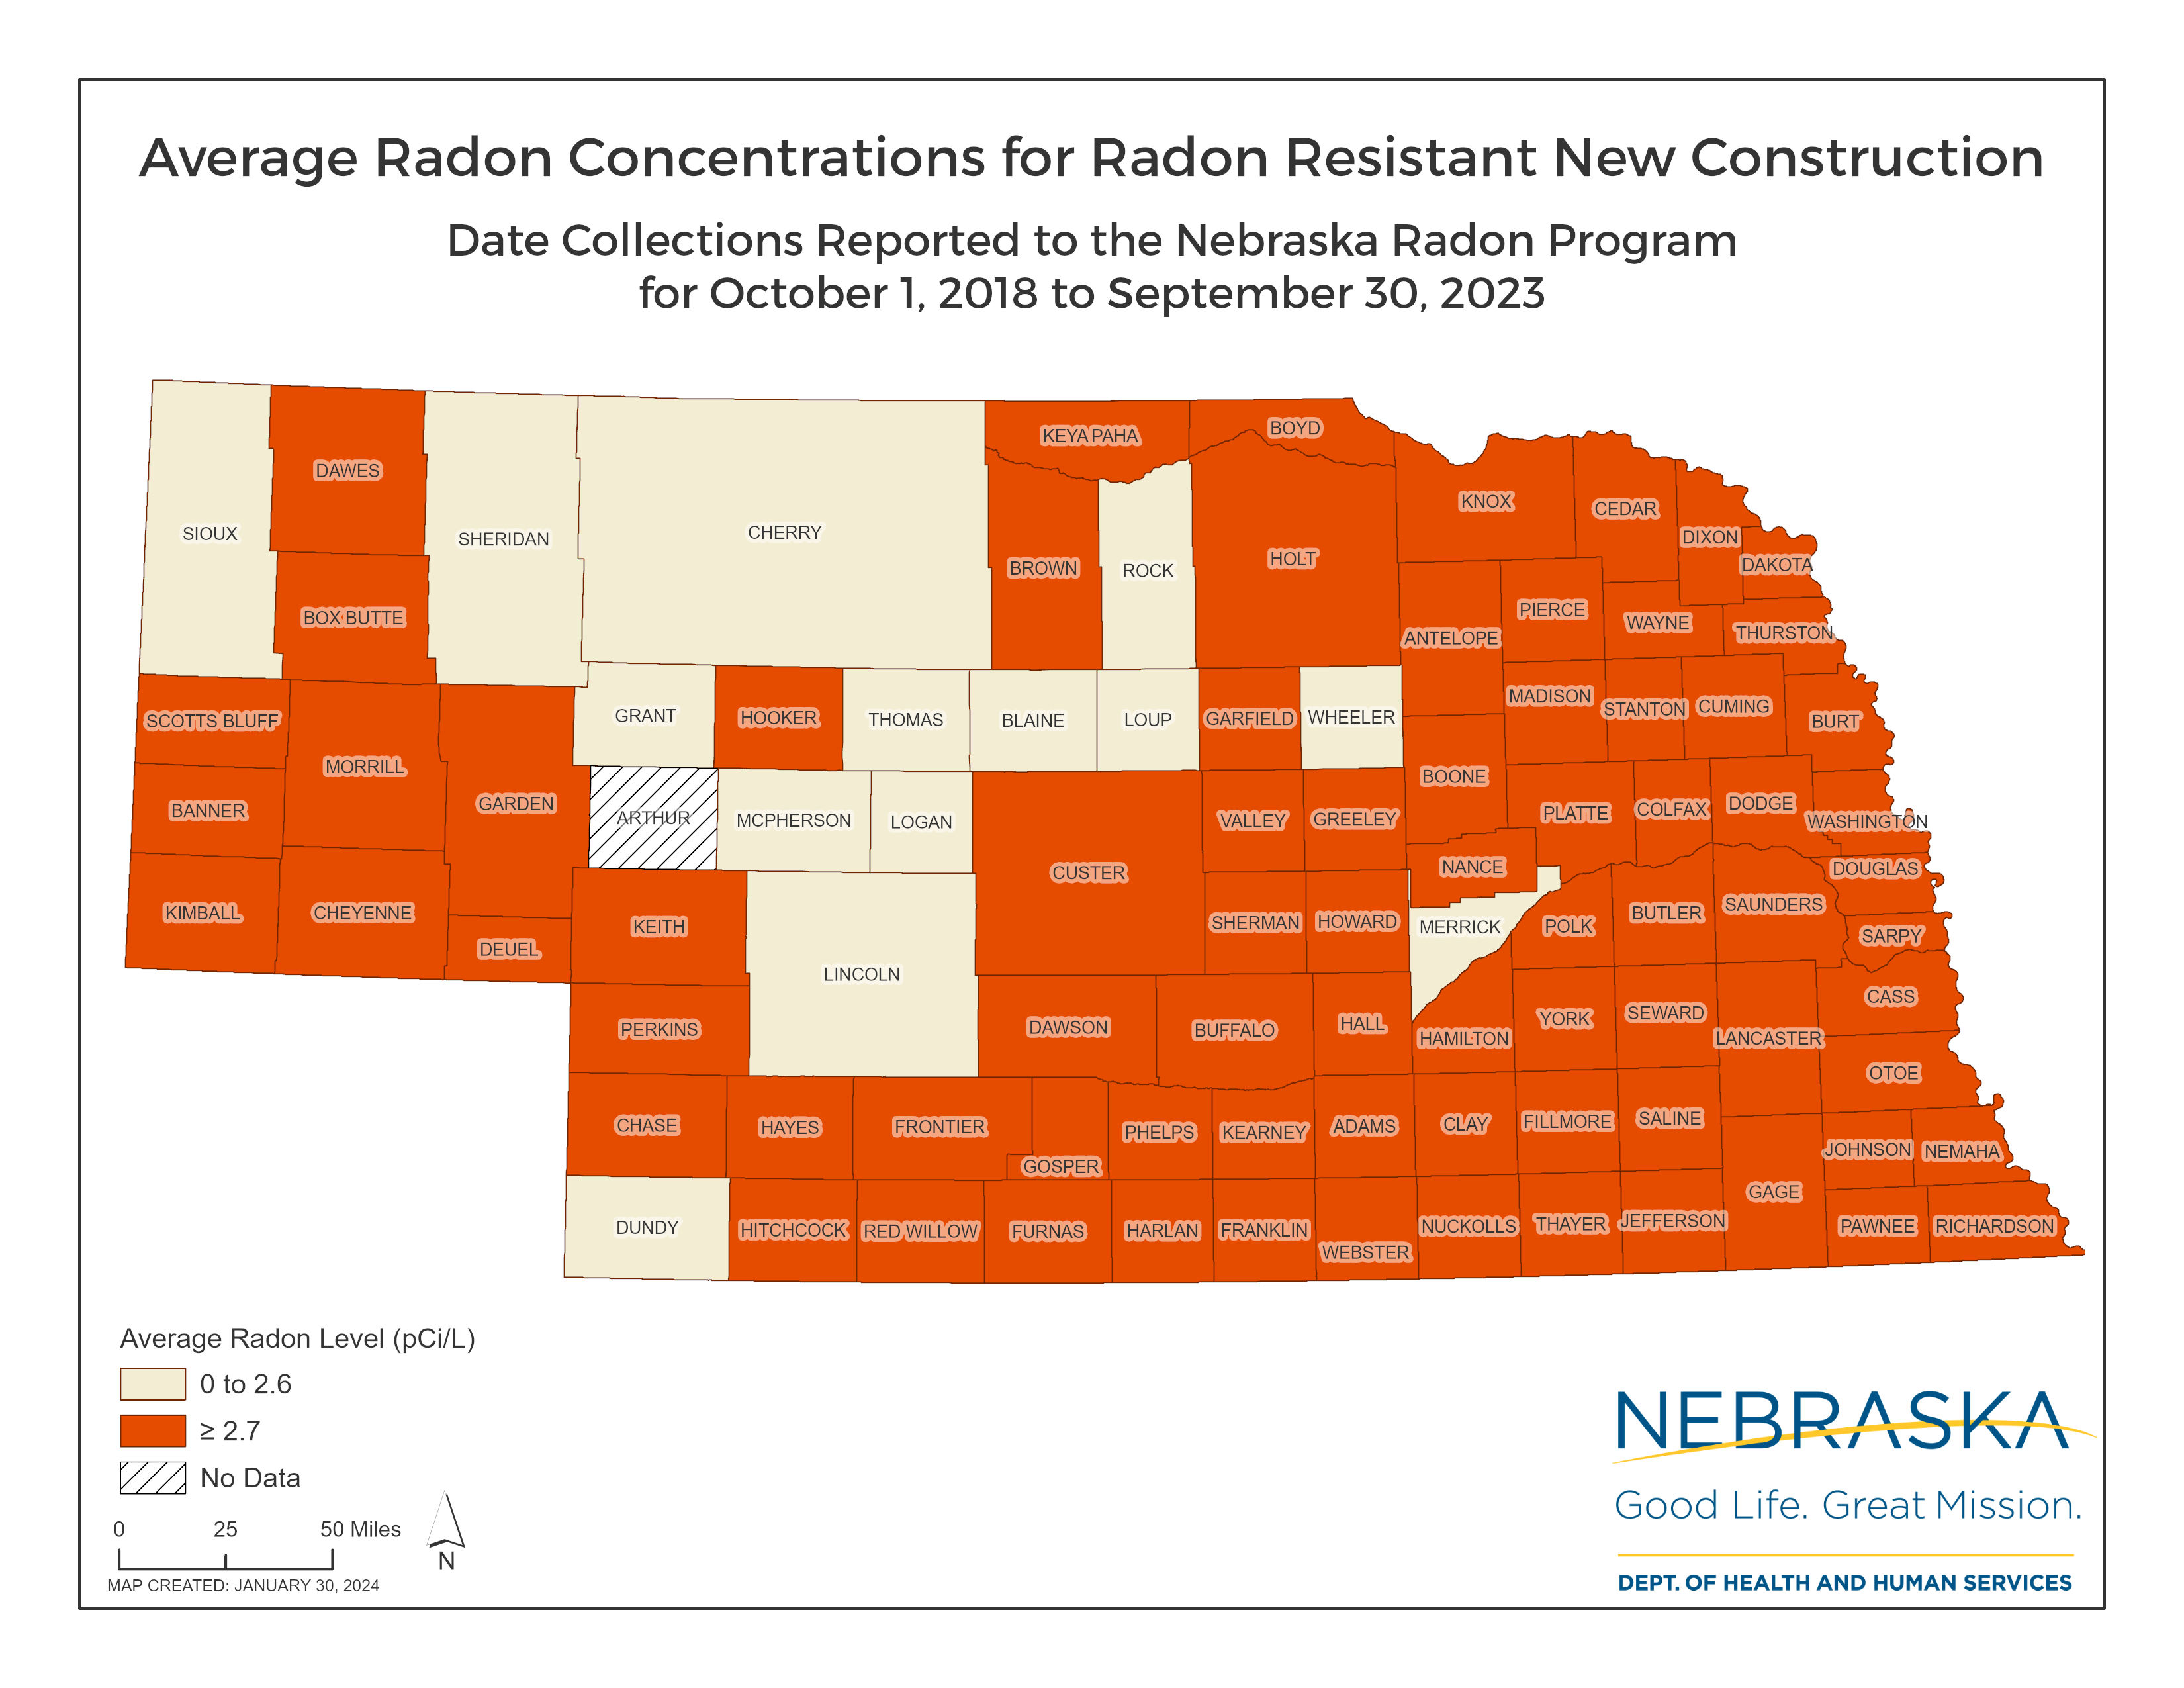 Radon Concentrations By County